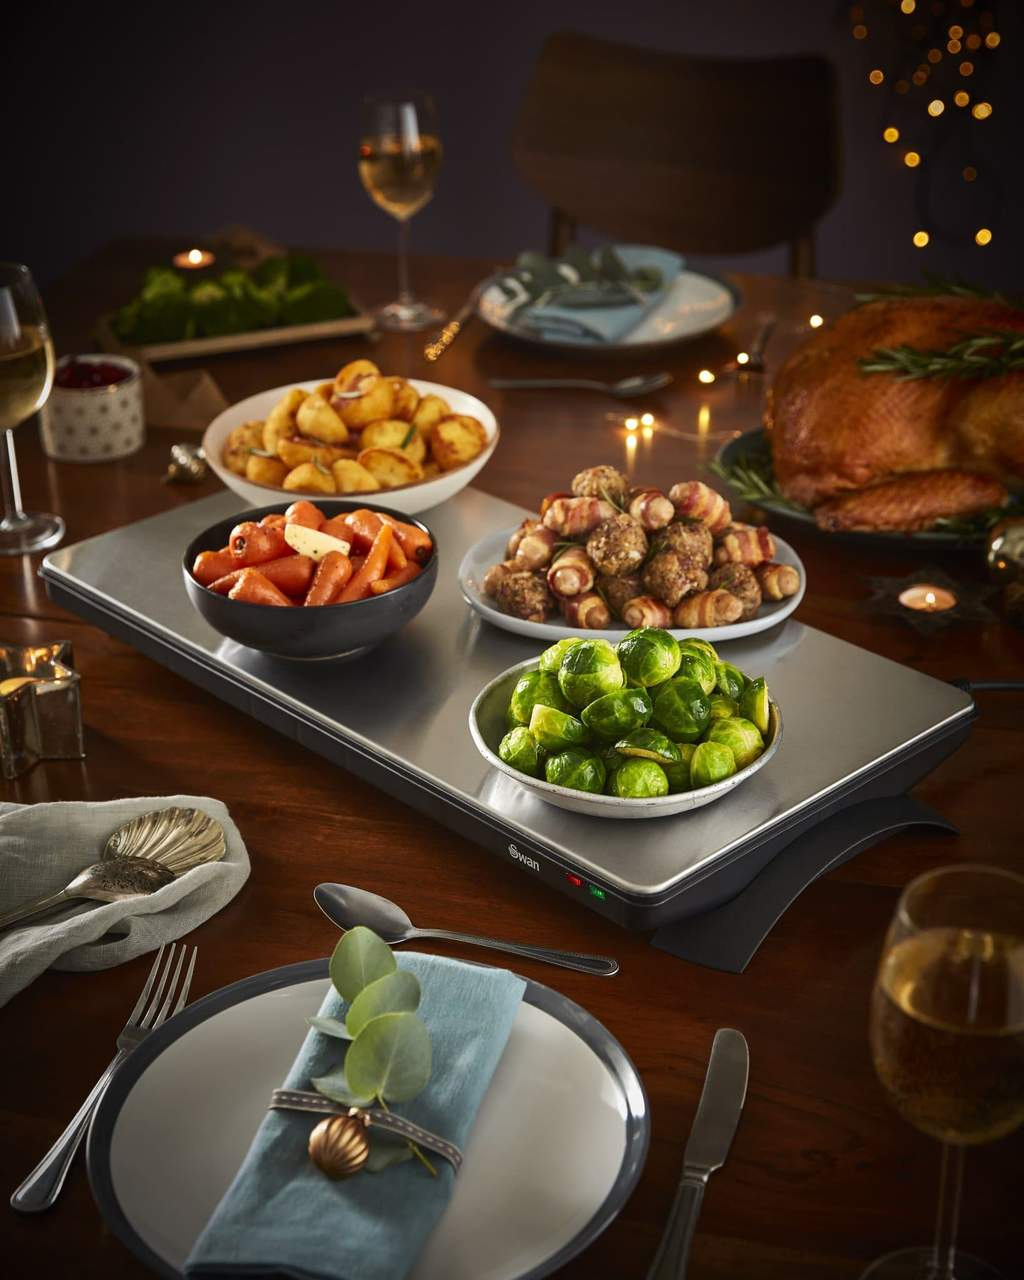 Keep your dishes warm with Swan cordless warming tray from BIYU